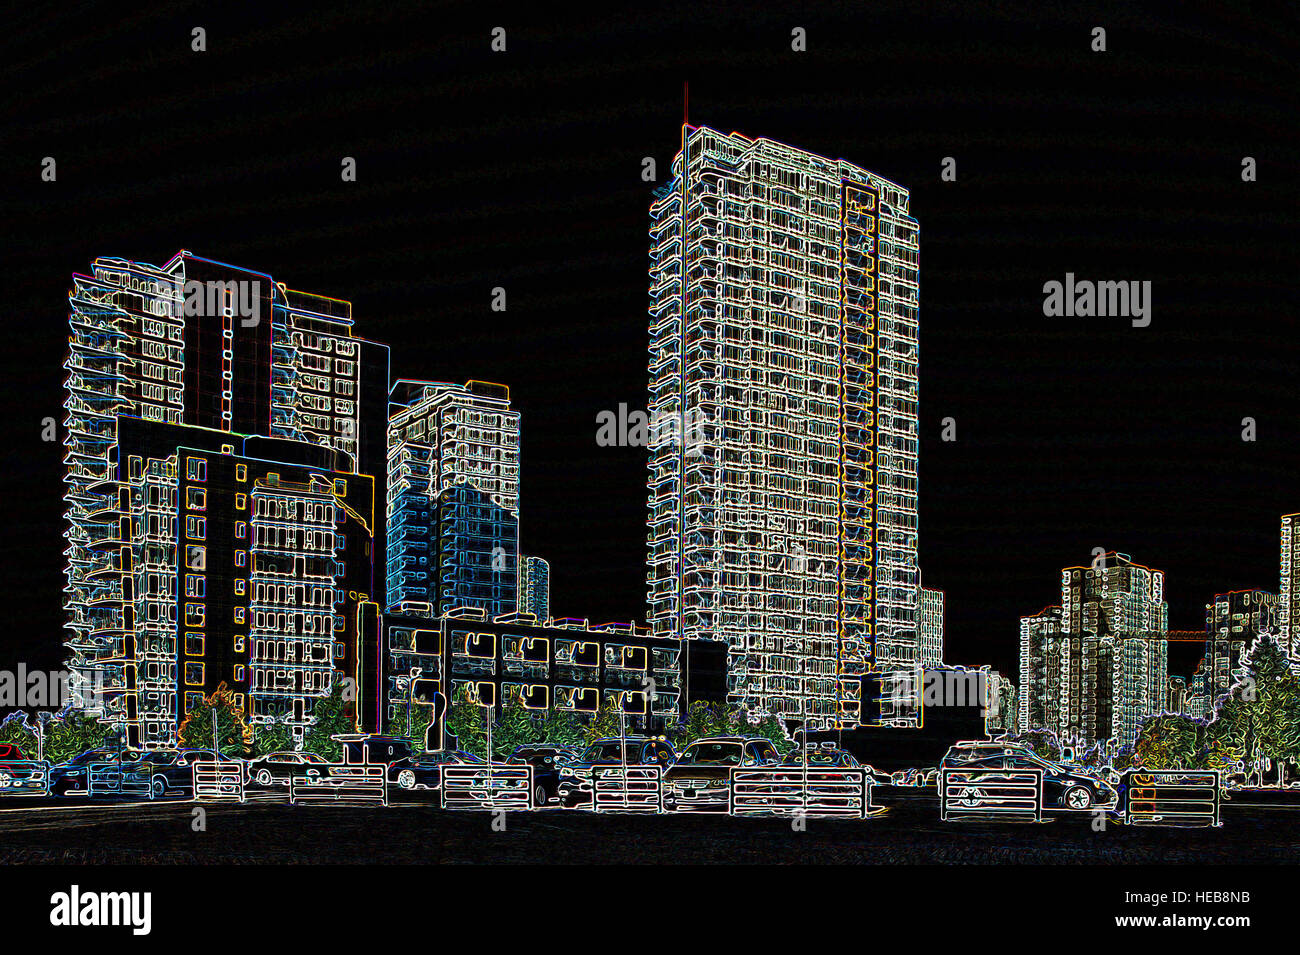 Highrise Buildings - Digitally Manipulated Image with Glowing Edges, Abstract Cityscape and Architecture on a Black Background Stock Photo